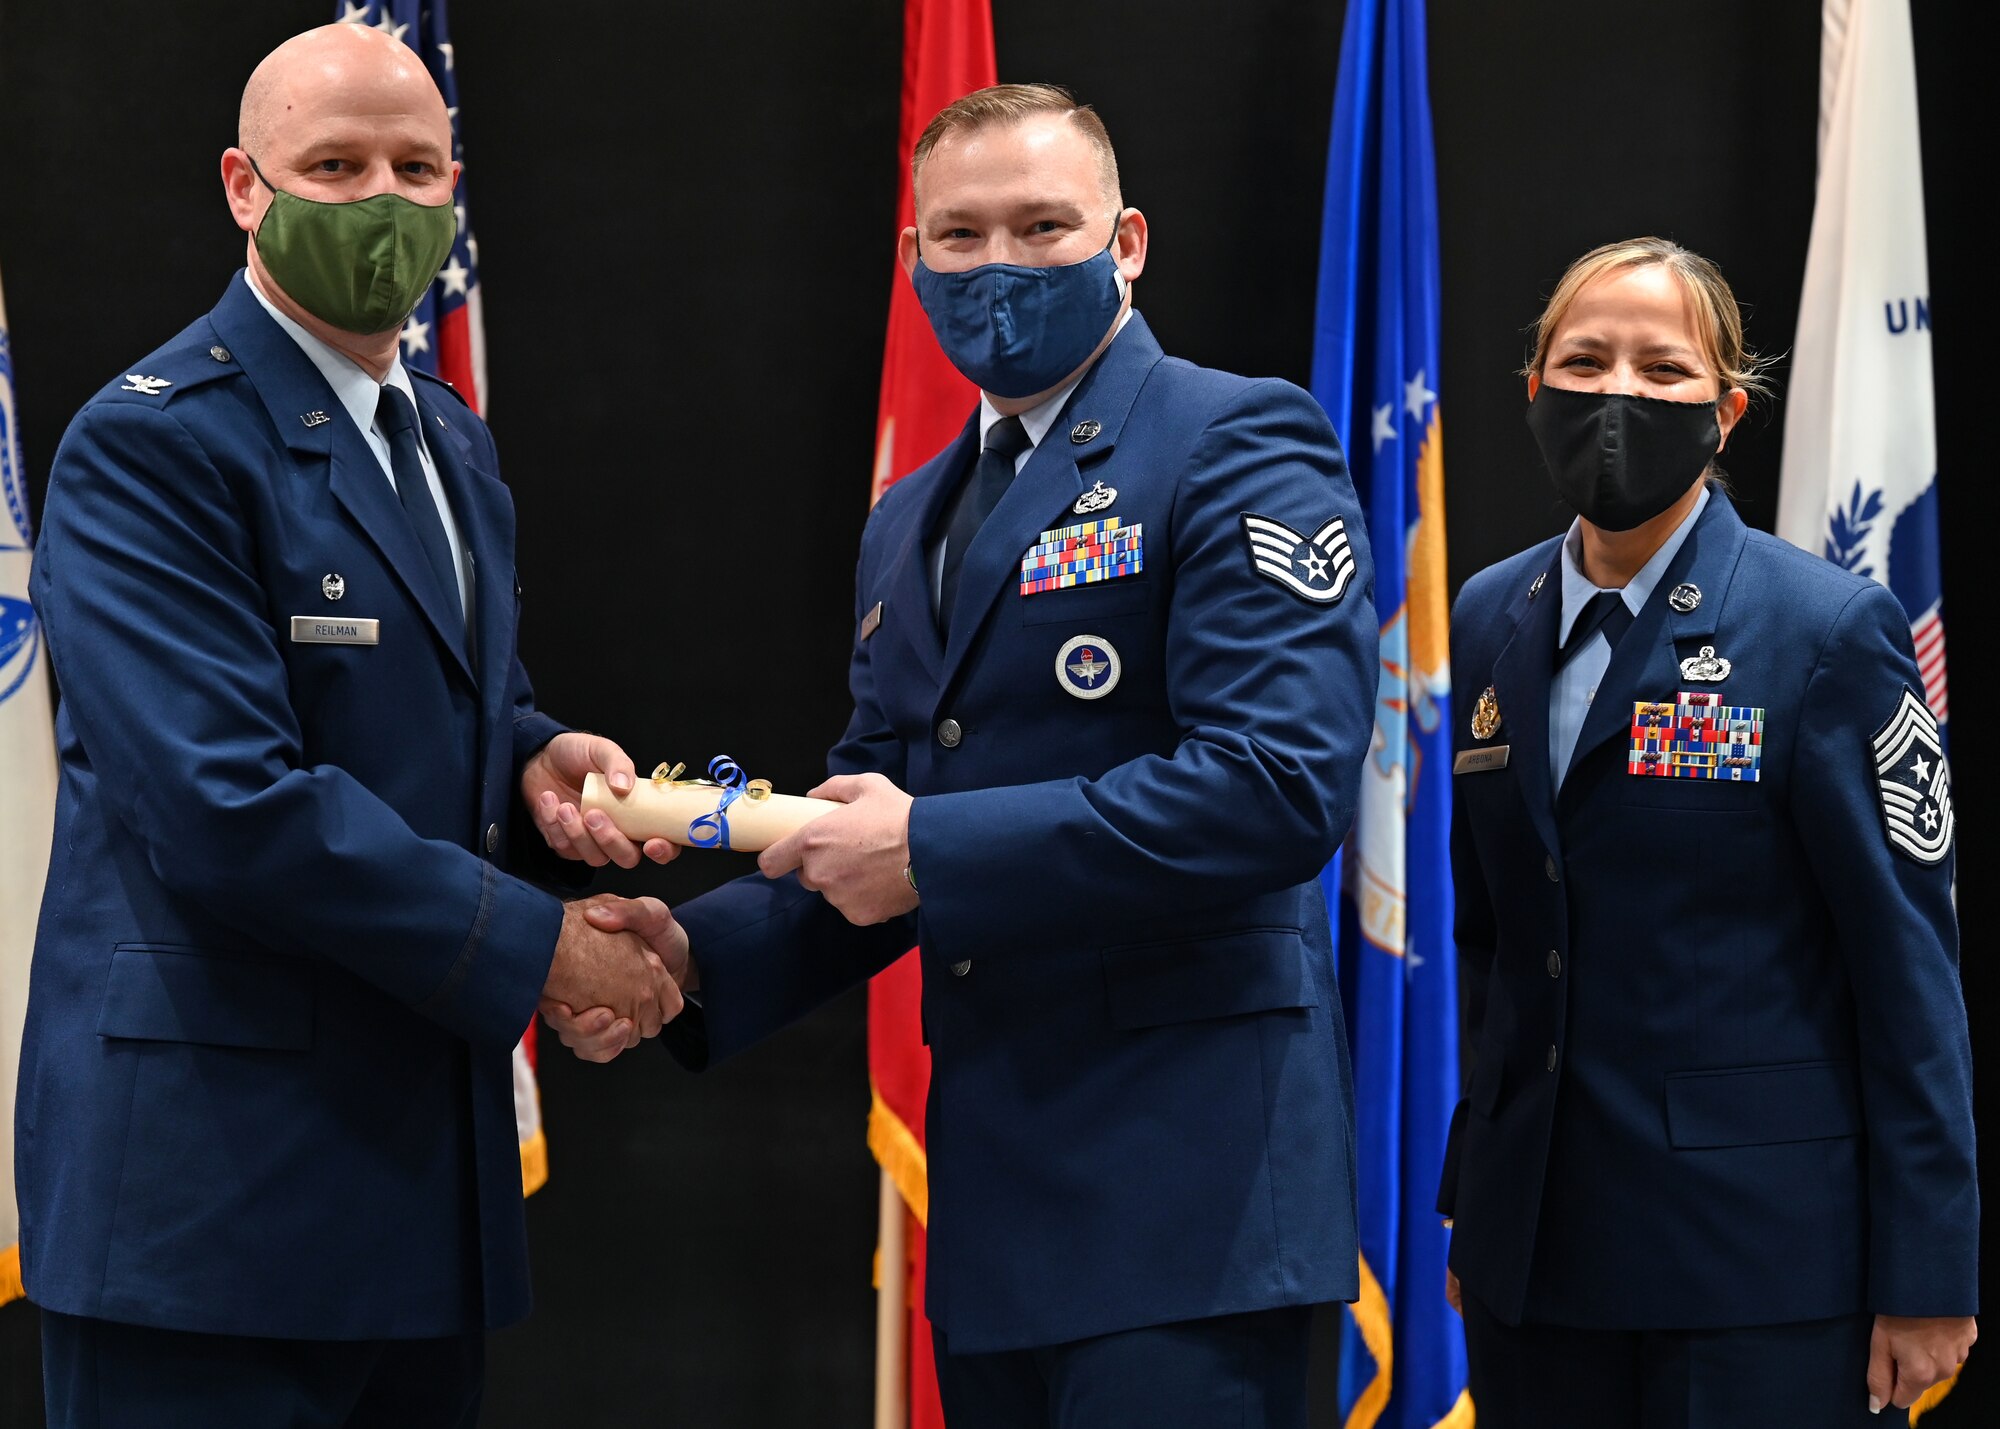 U.S. Air Force Col. Matthew Reilman, 17th Training Wing commander, presents Staff Sgt. Donald Moon, 312th Training Squadron special instruments training instructor, with a diploma from the Community College of the Air Force at the CCAF graduation in the Powell Event Center, Nov. 10, 2021. Moon and other graduates gained their associate of applied science degree through hard work and dedication. (U.S. Air Force photo by Senior Airman Ethan Sherwood)